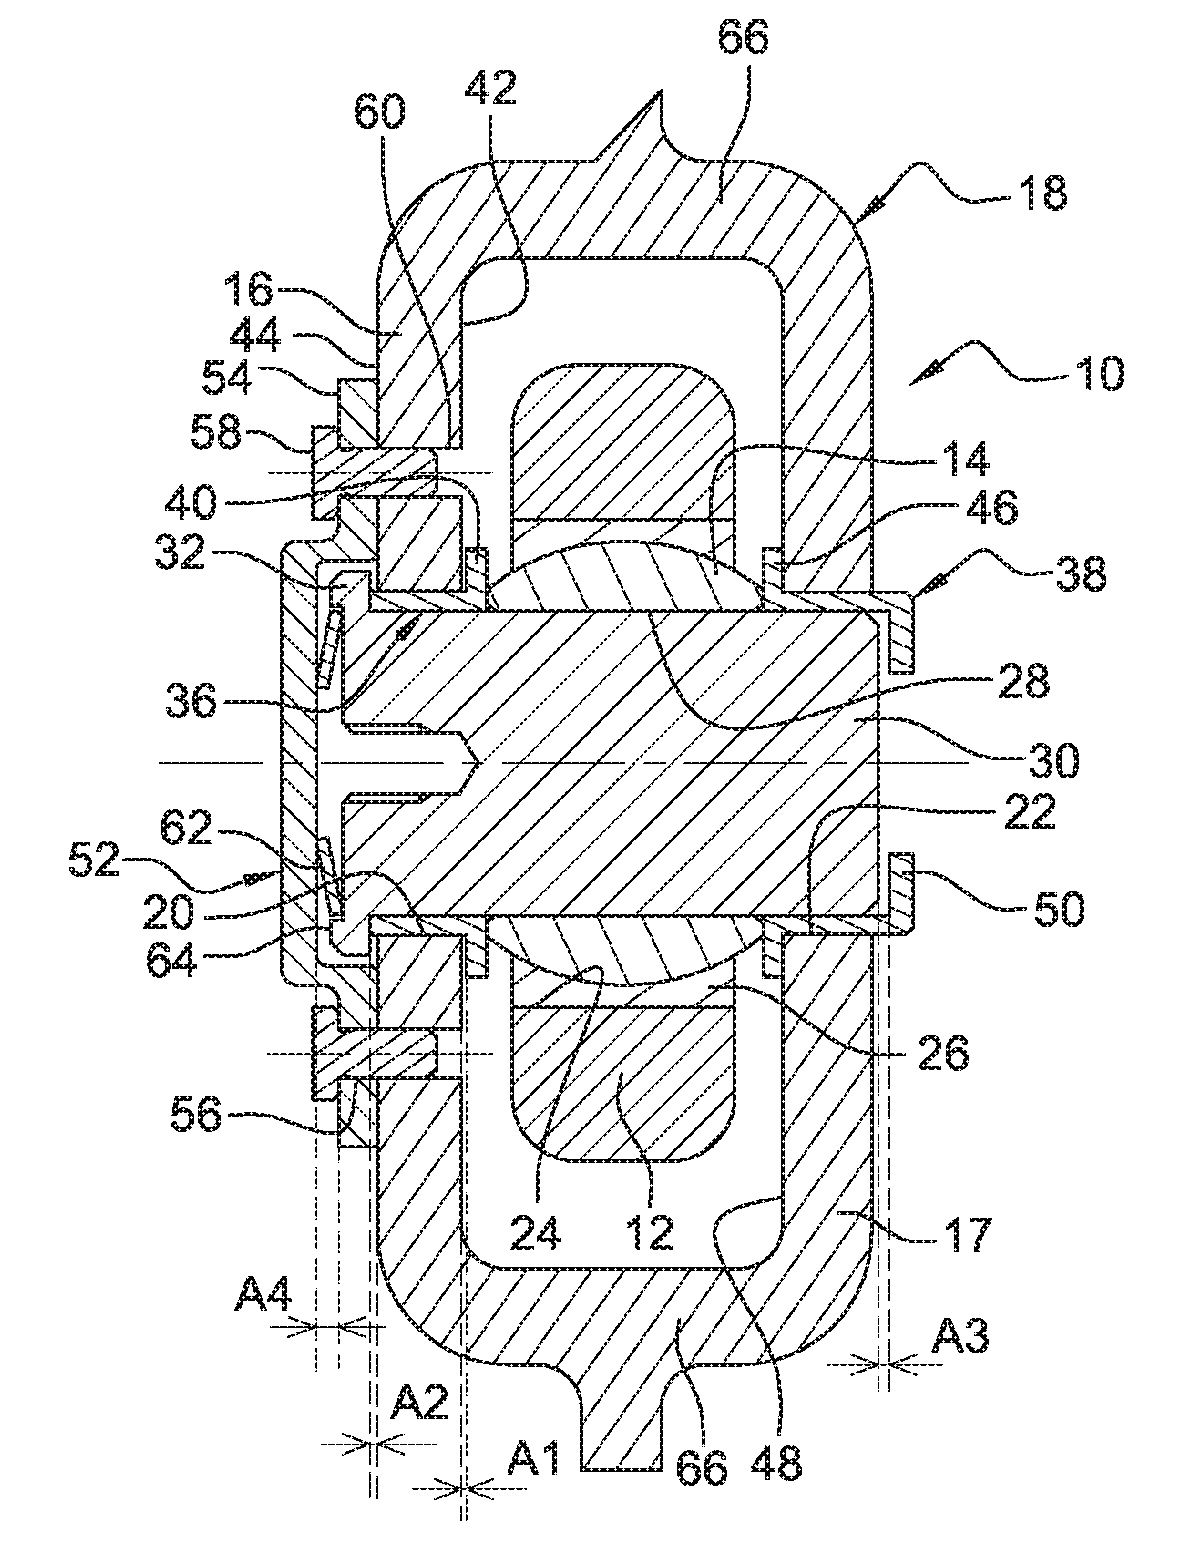 Ball joint device for a turbine engine